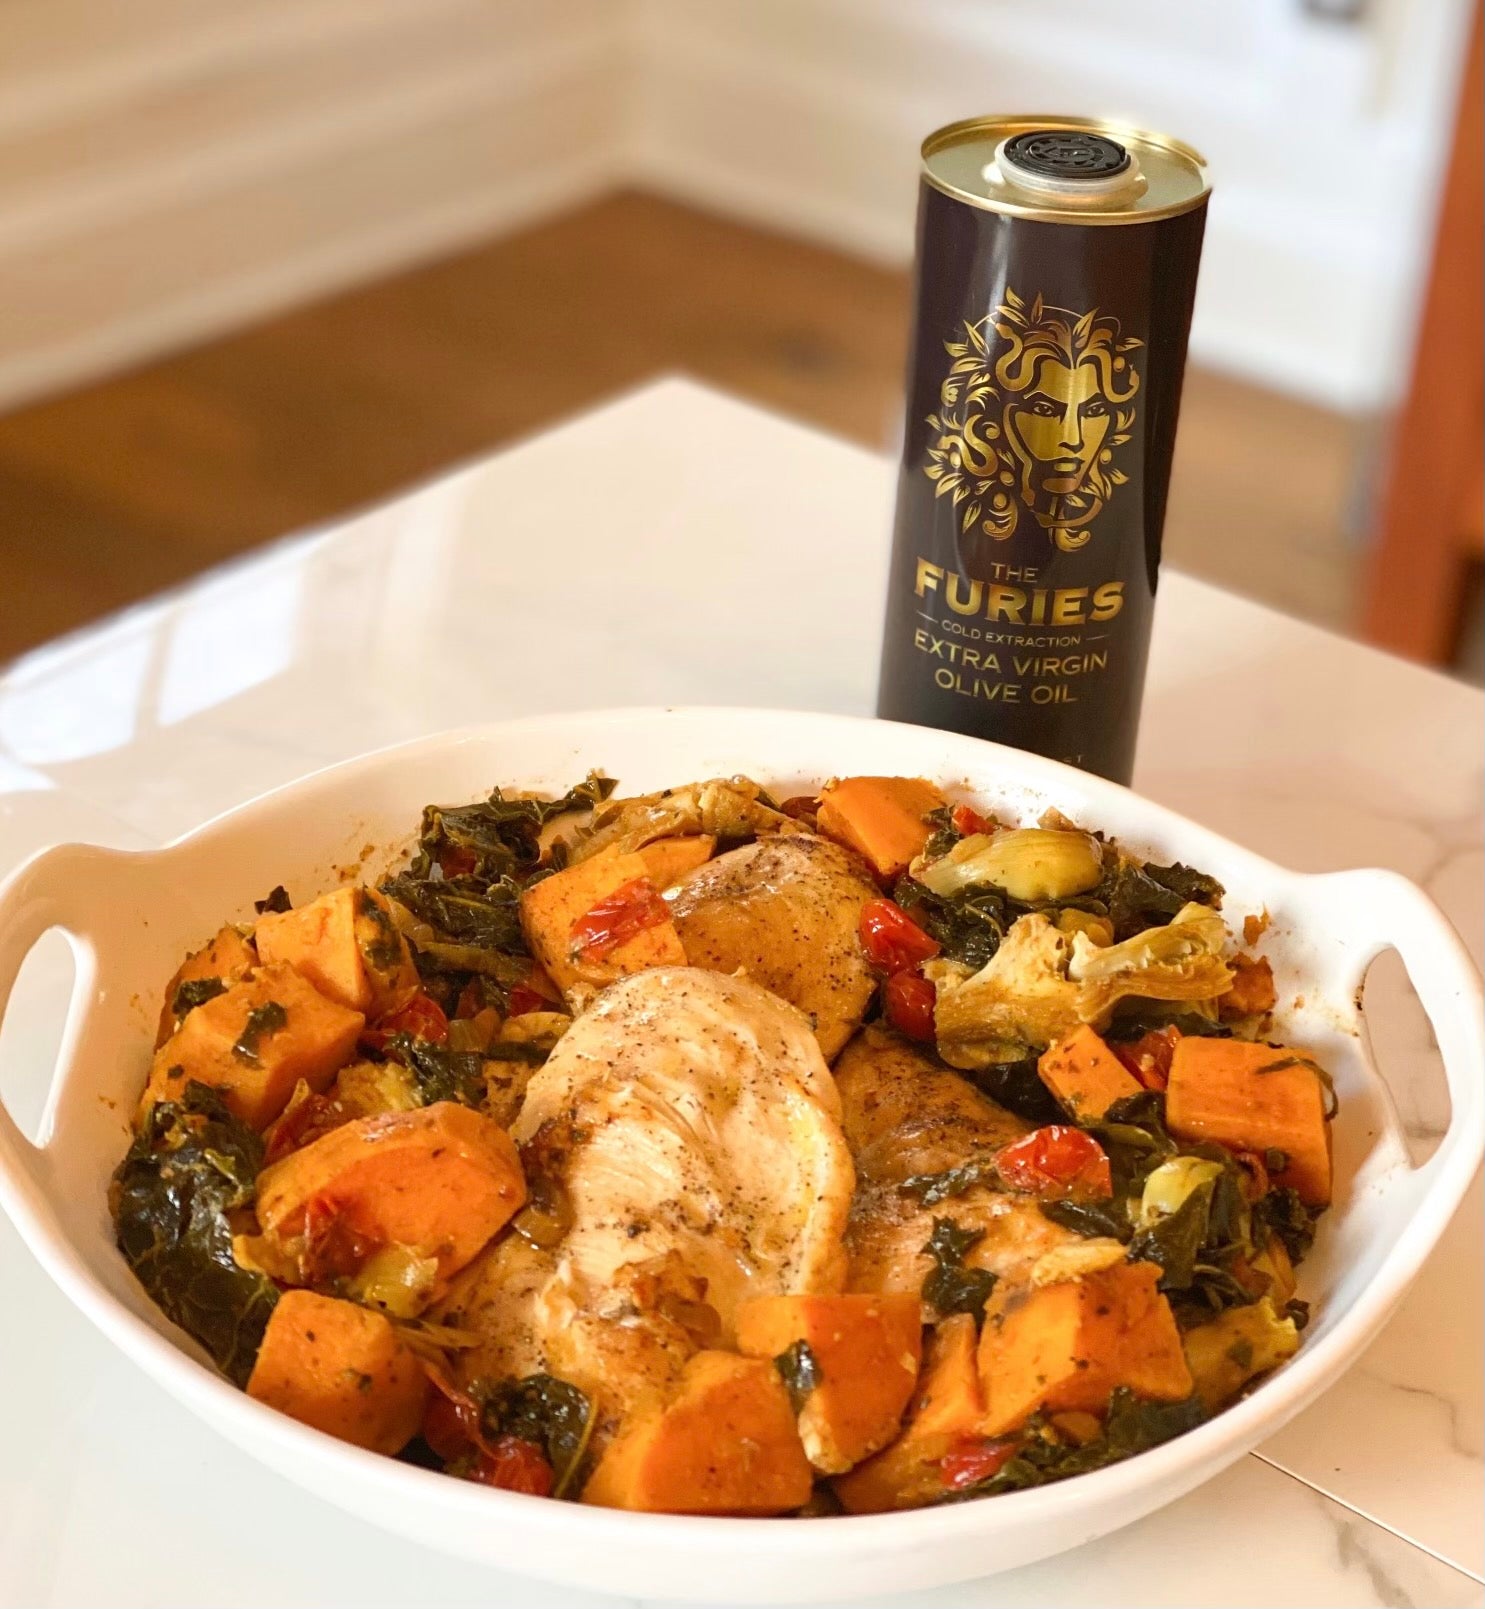 Roasted One Pot Chicken with Kale, Sweet Potatoes and Artichoke Hearts